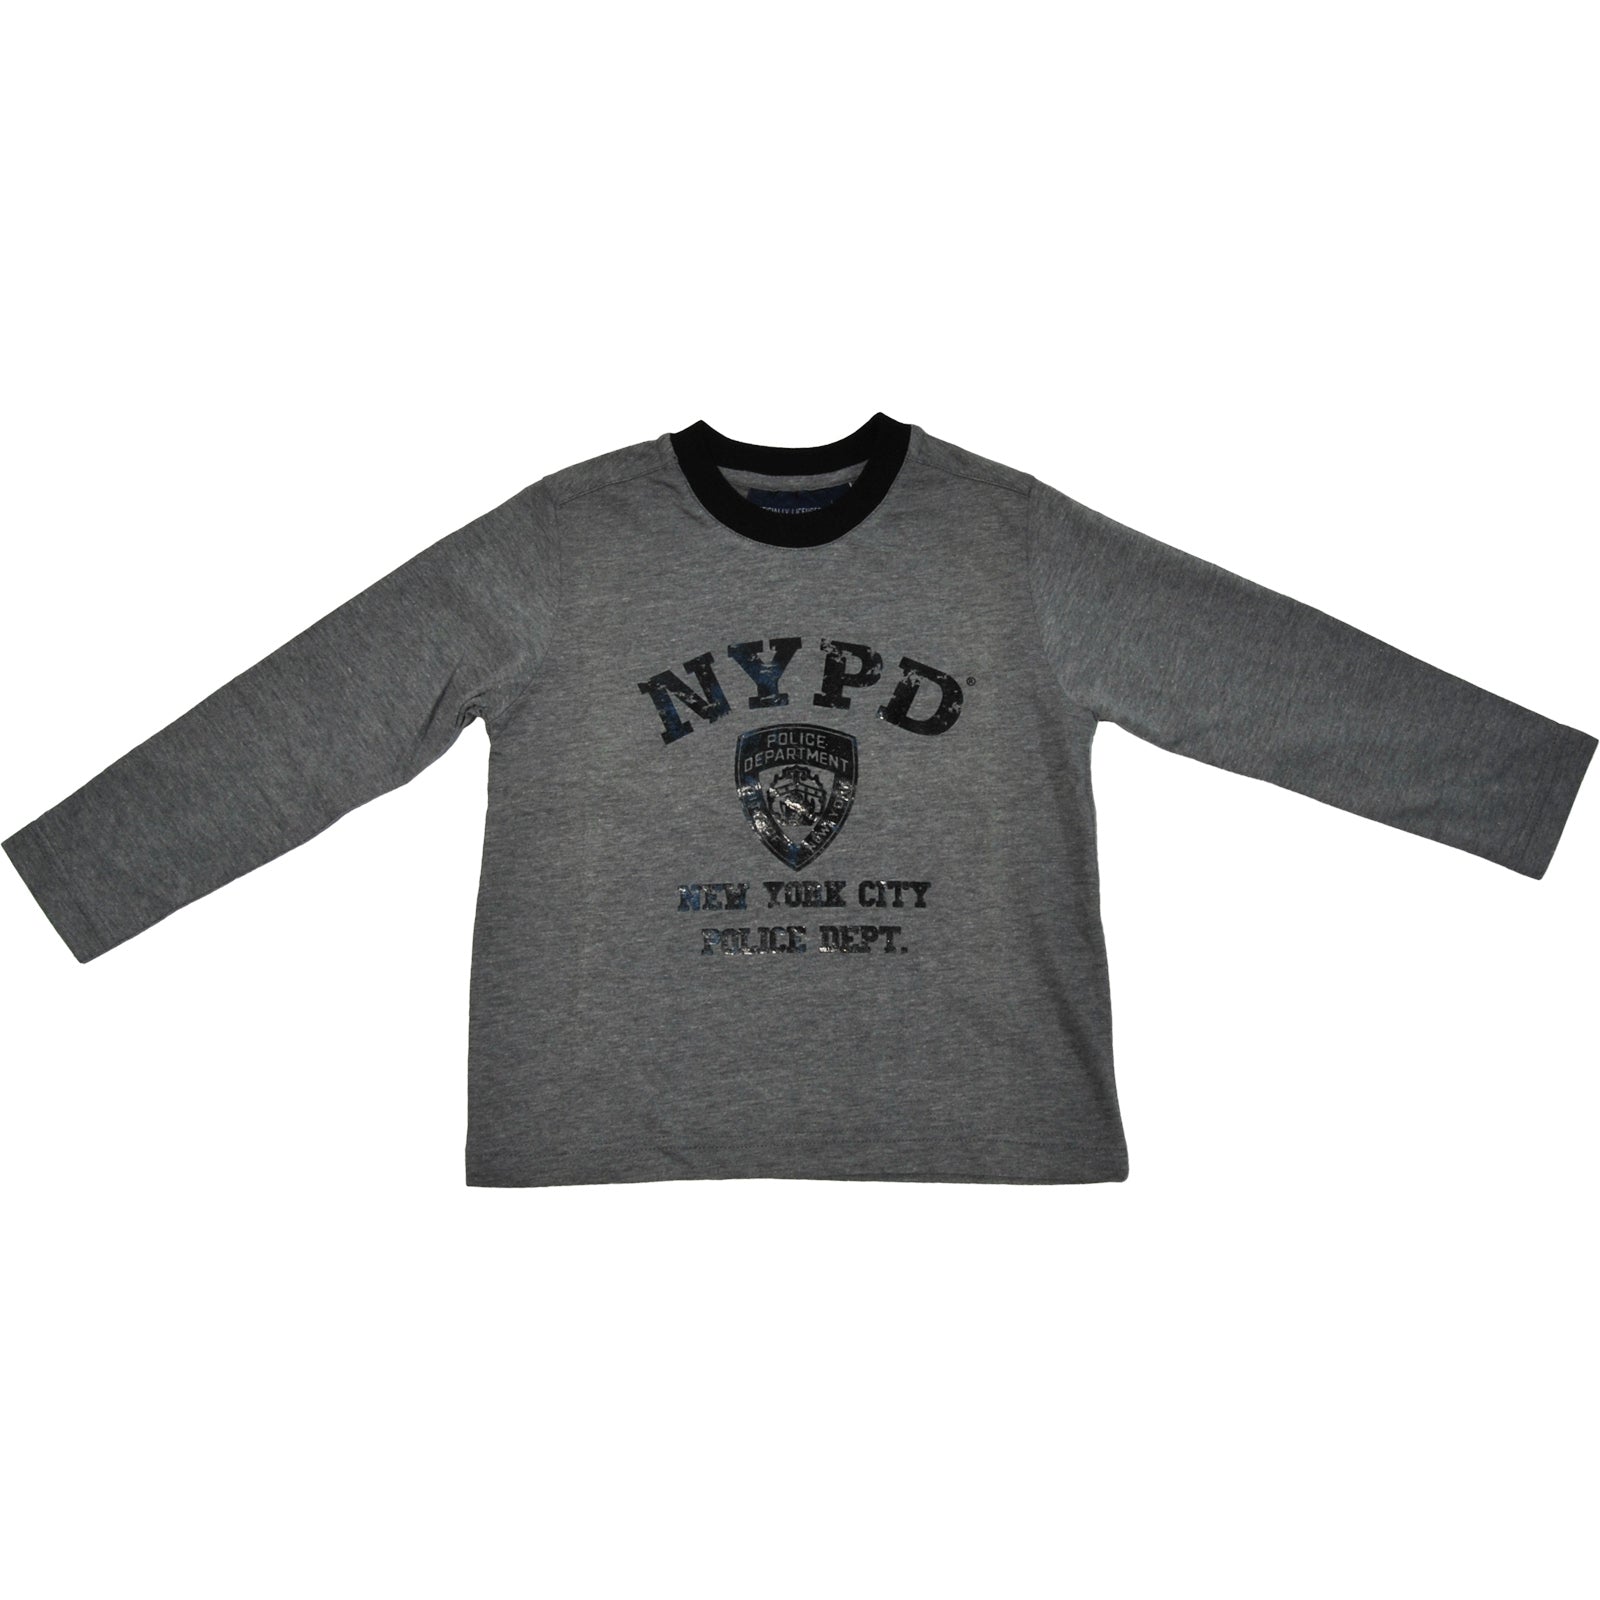 
  Long-sleeved T-shirt from the children's clothing line Blueberry with logo print on the front....